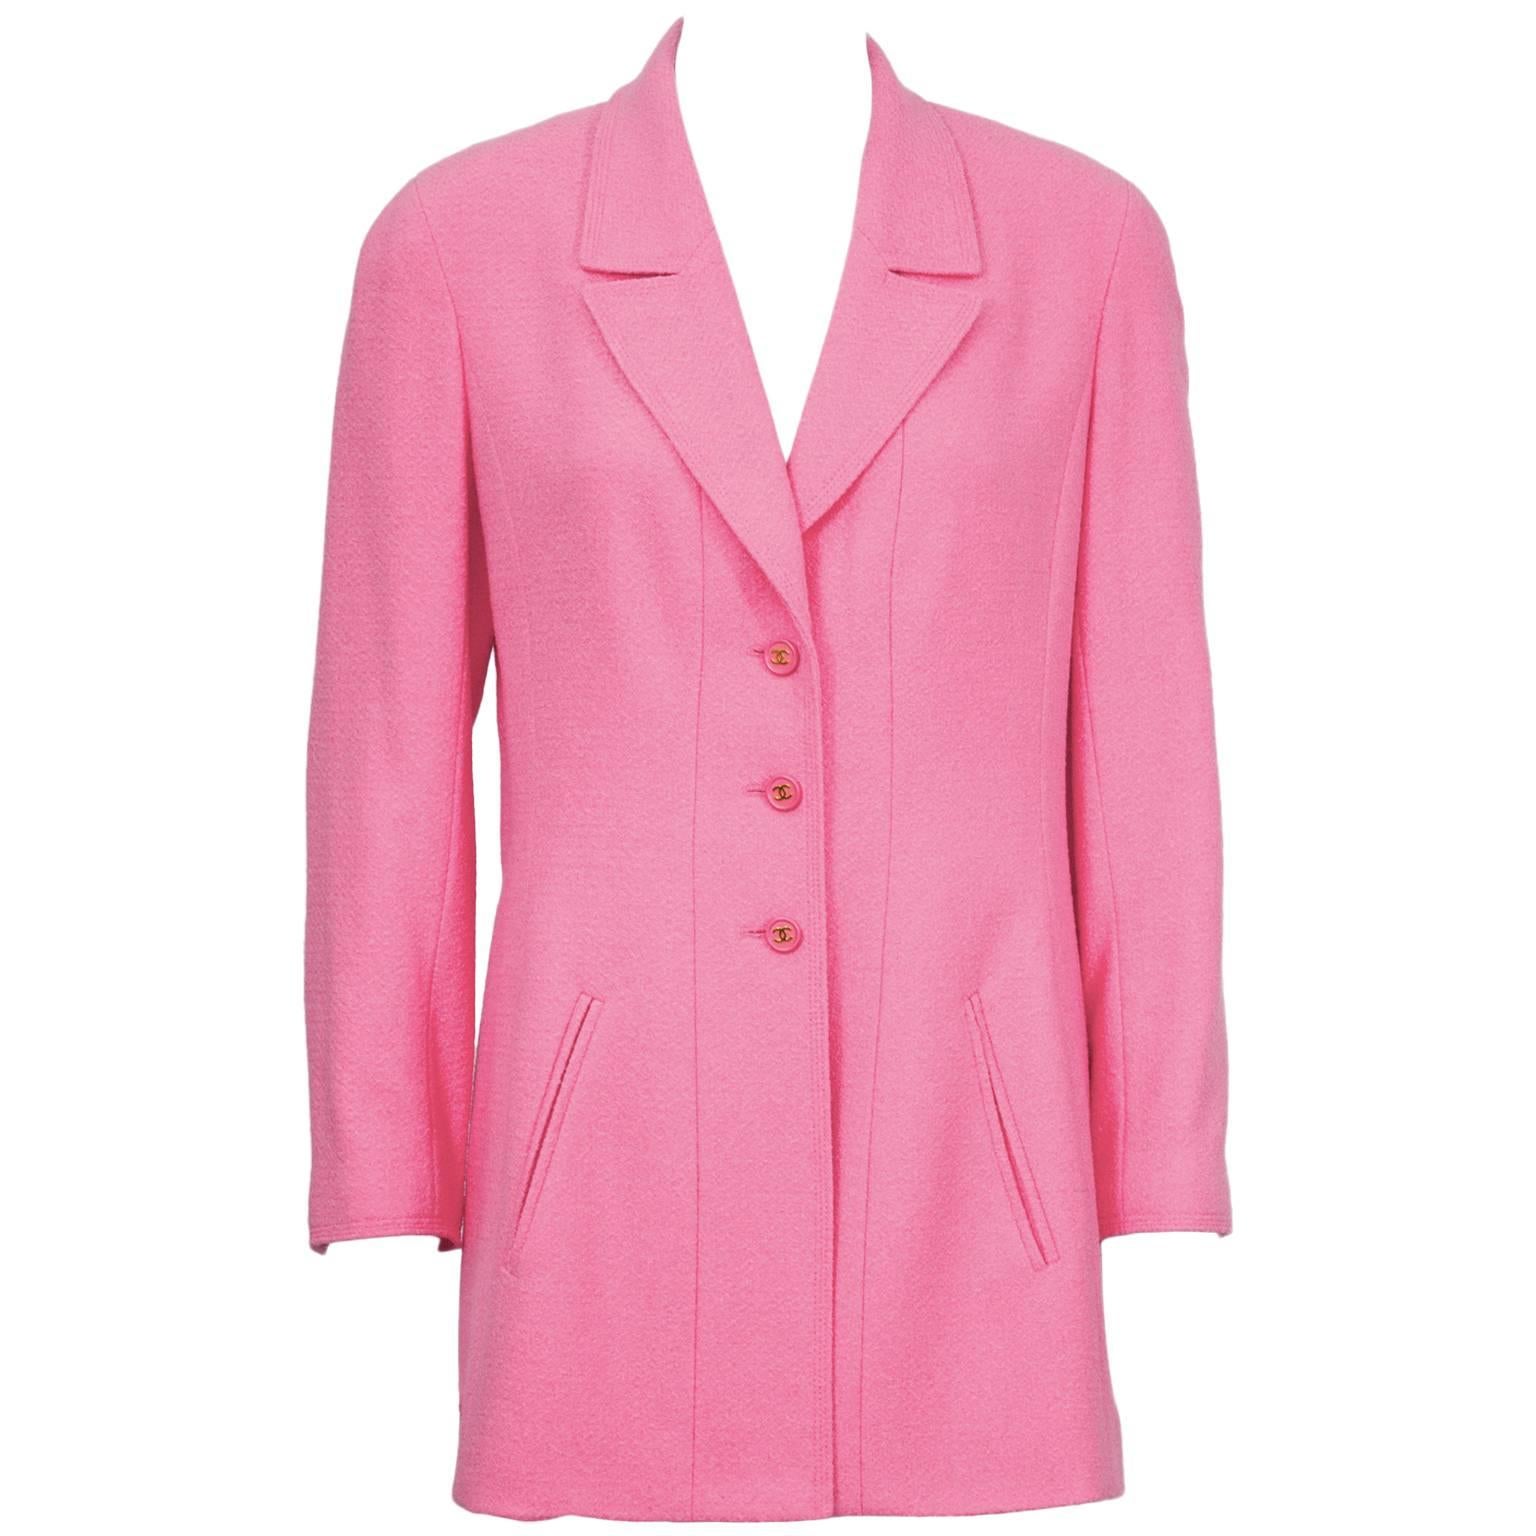 1997 Spring Chanel Hot Pink Boucle Jacket 